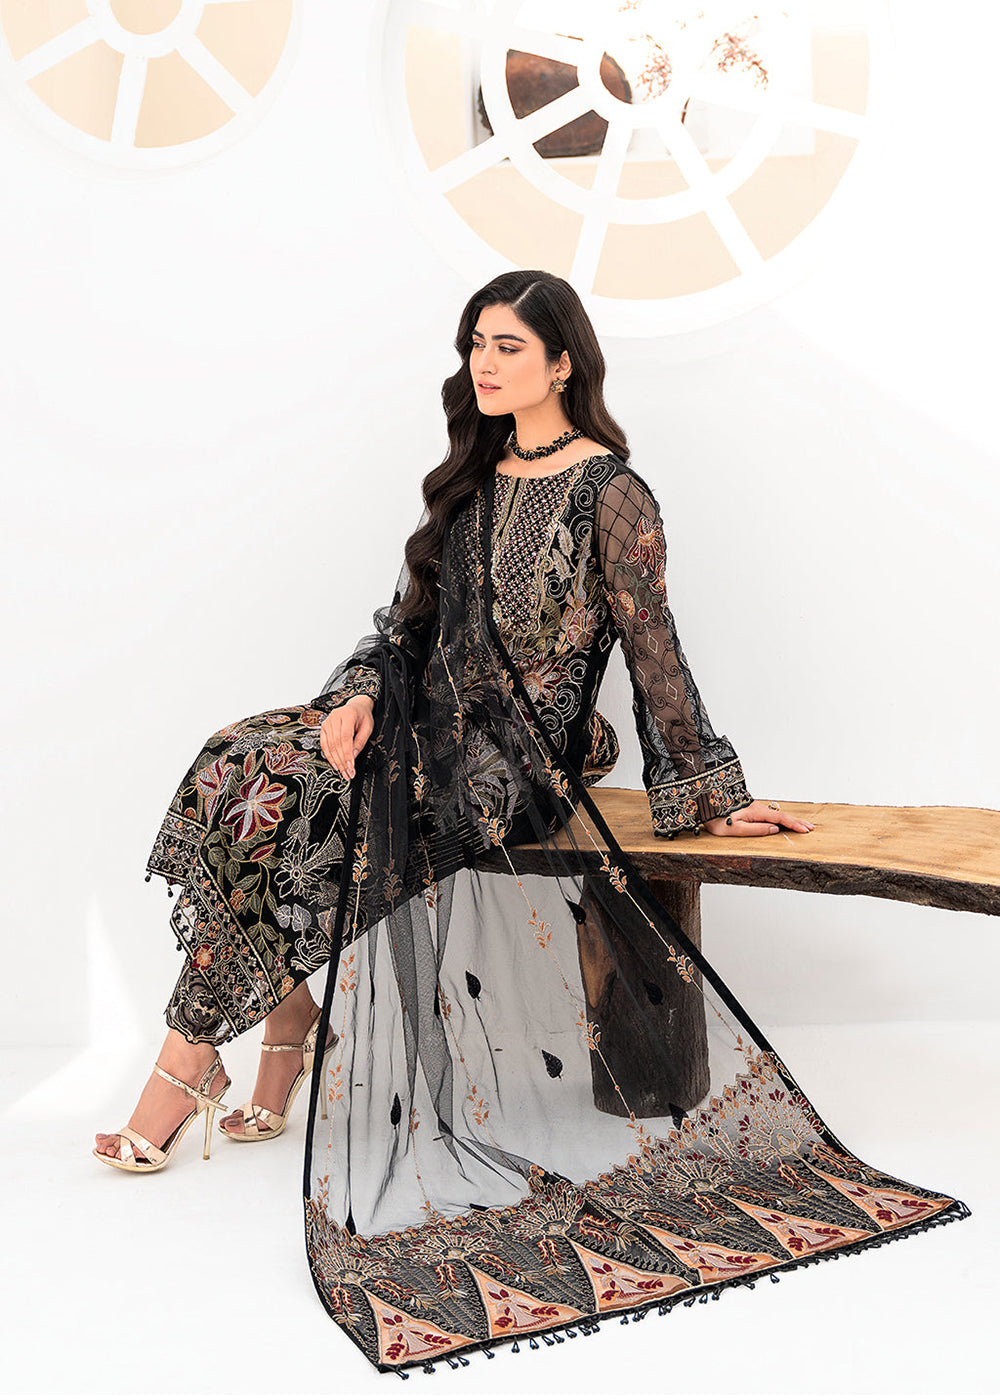 Buy Now Black Organza Suit - Ramsha Minhal Collection Vol 8 - #M-803 Online in USA, UK, Canada & Worldwide at Empress Clothing. 